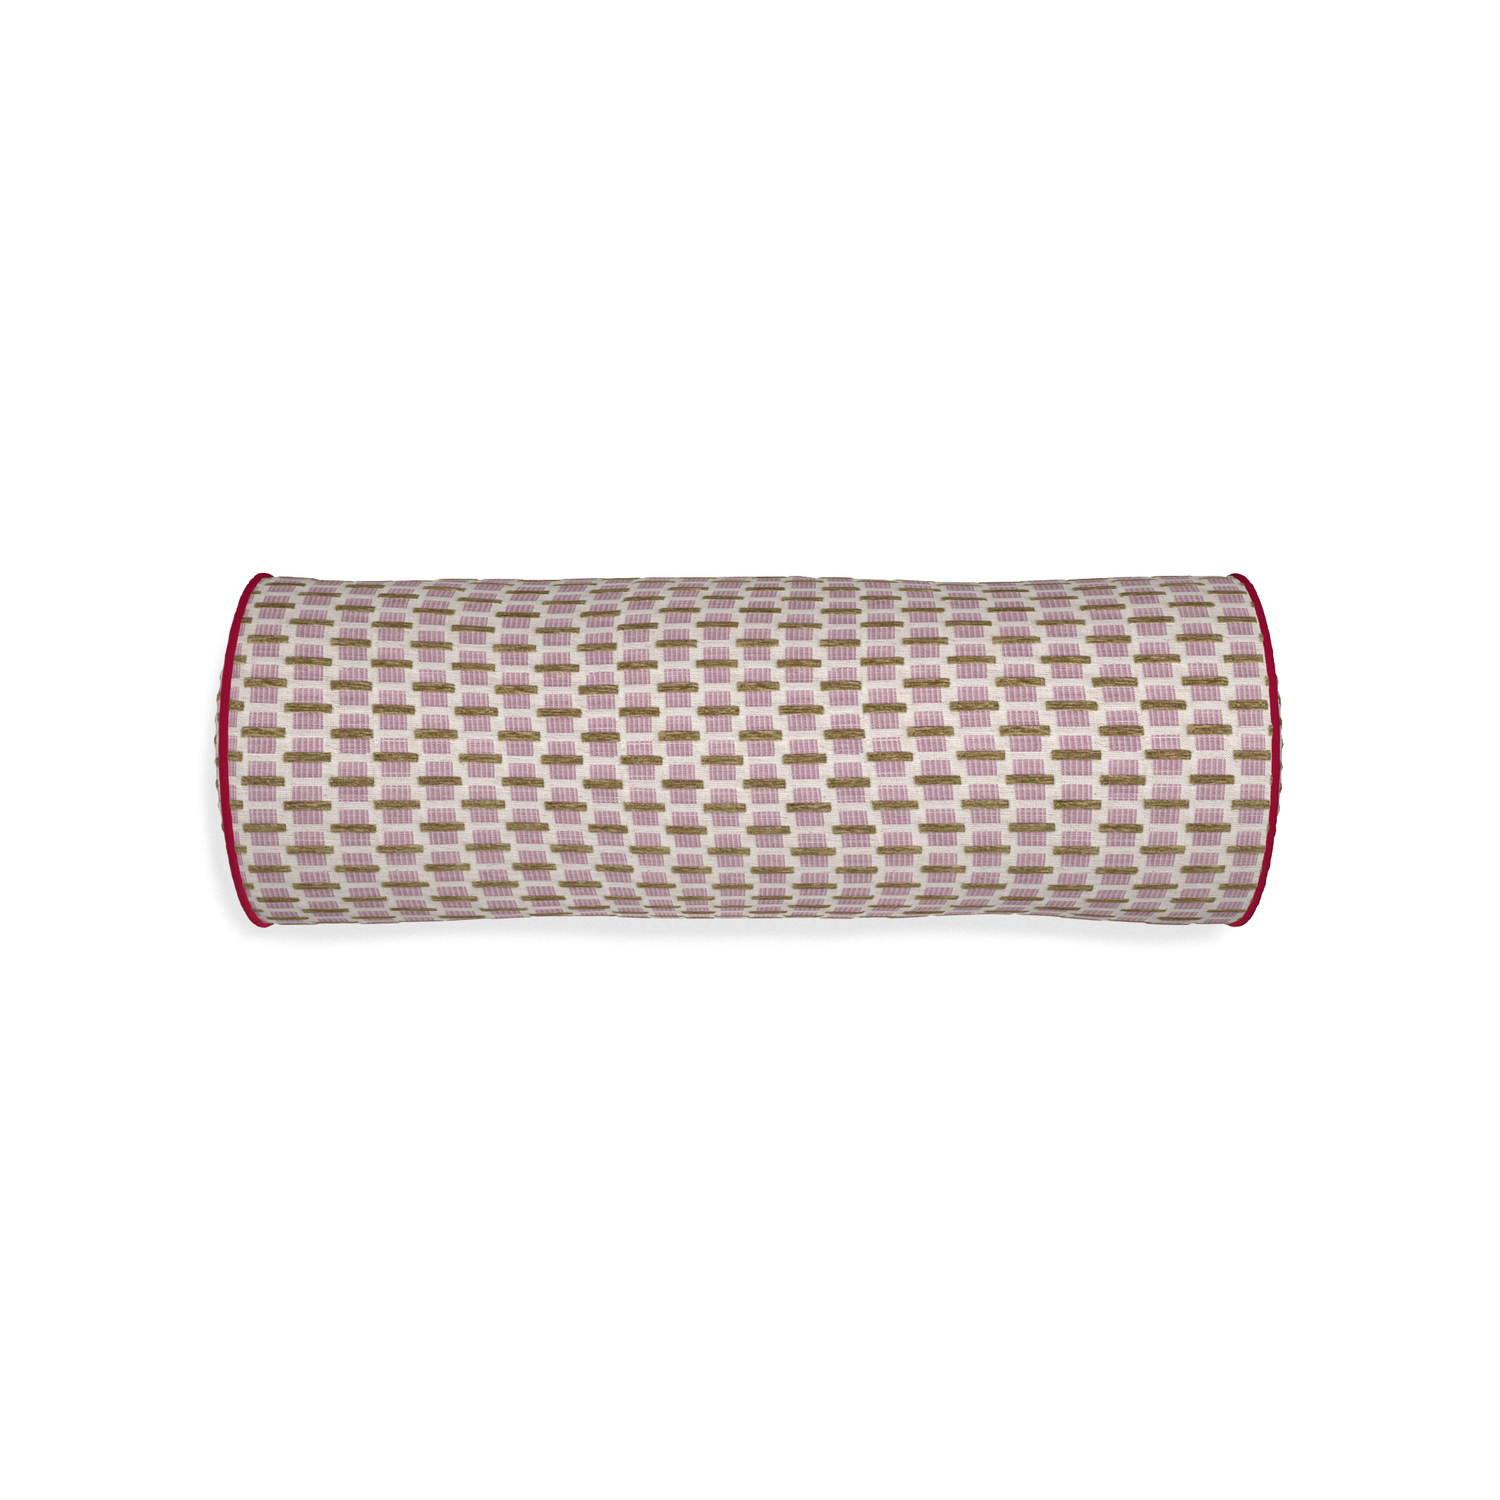 Bolster willow orchid custom pink geometric chenillepillow with raspberry piping on white background